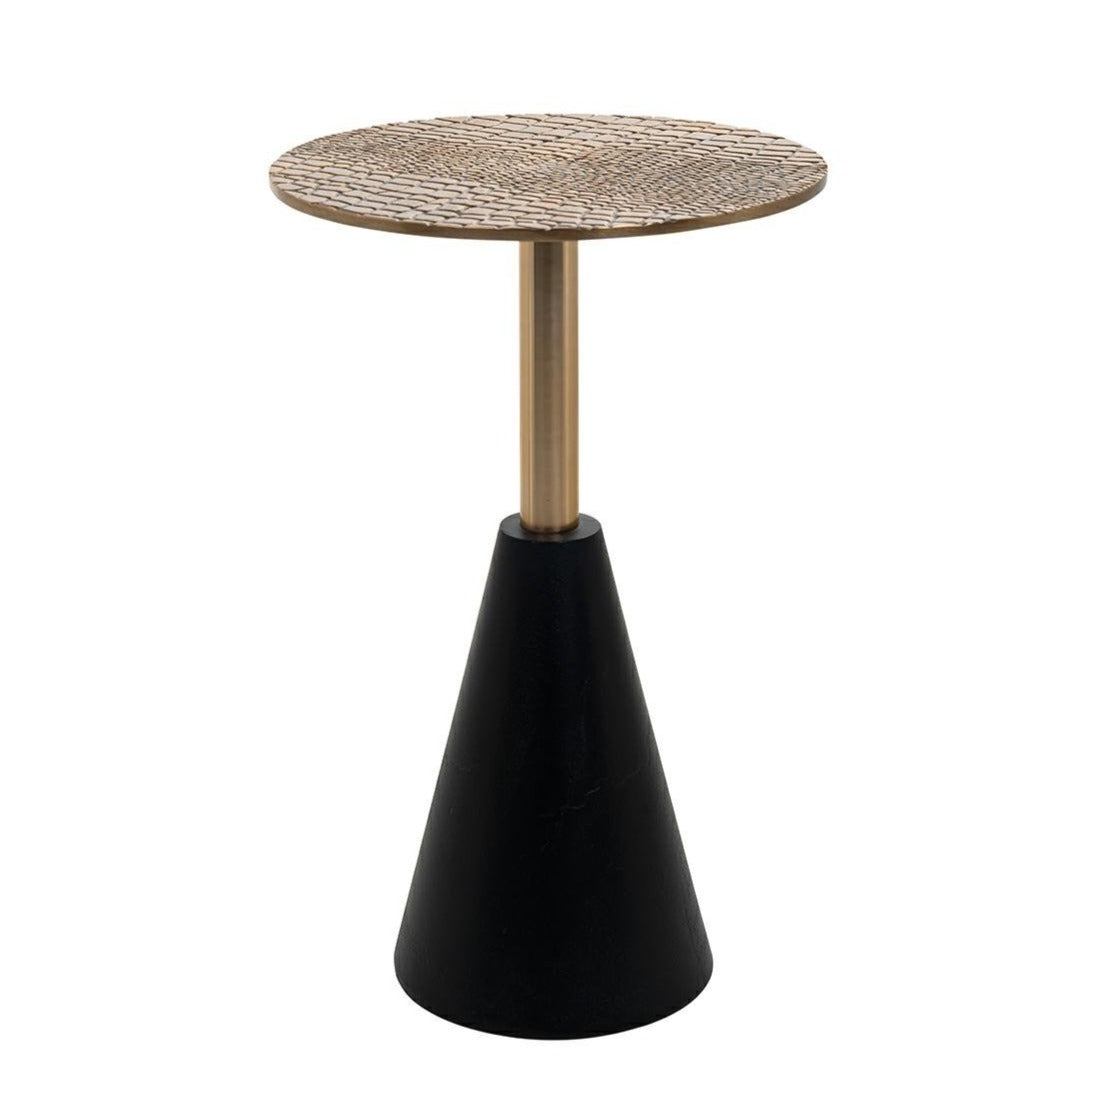 The golden top finished with an exotic pattern and the original shape of the table will give the interior a unique style. Cobra 29 was made entirely of aluminum. Perfect for a living room as a coffee and auxiliary table.